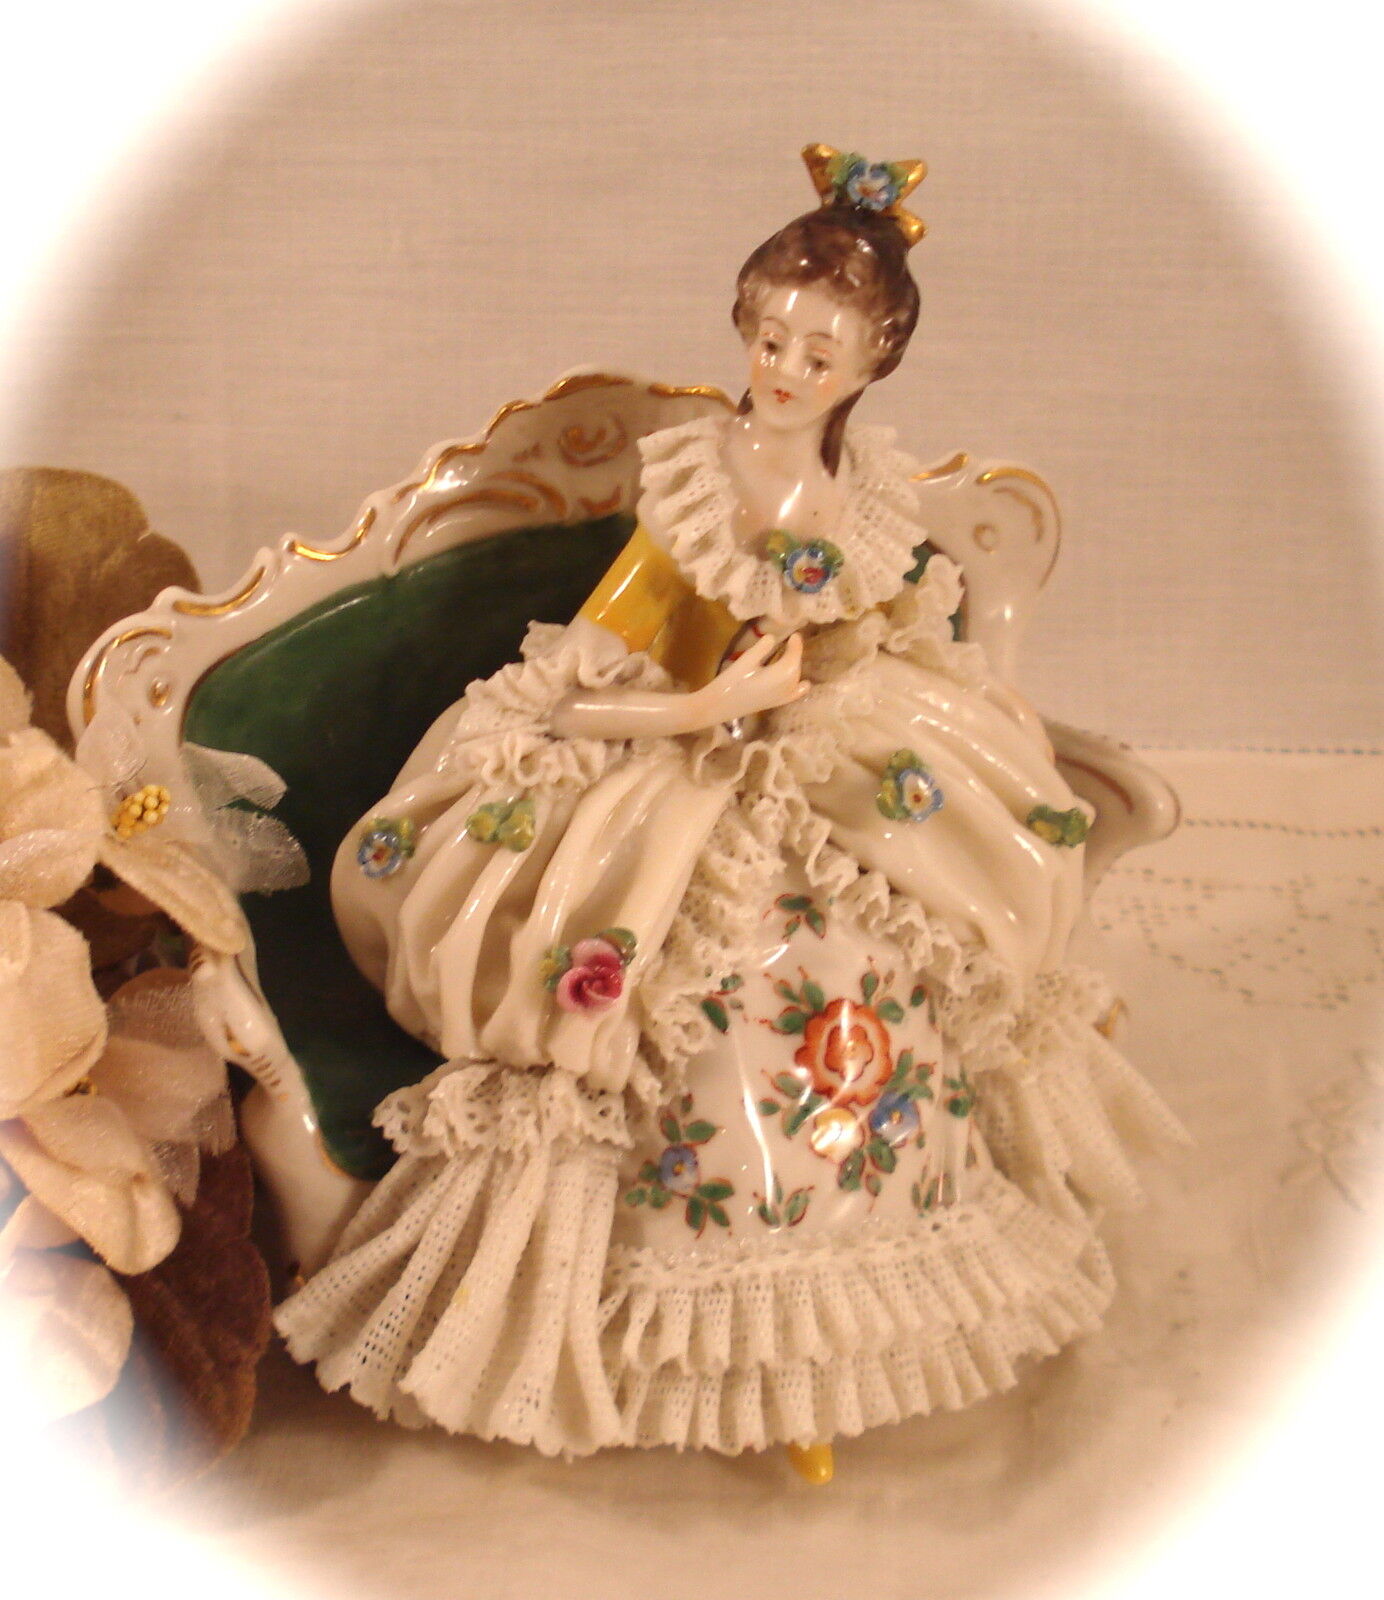 VINTAGE GERMANY DRESDEN LACE PORCELAIN FIGURINE BEAUTIFUL YOUNG LADY ON SETTEE 